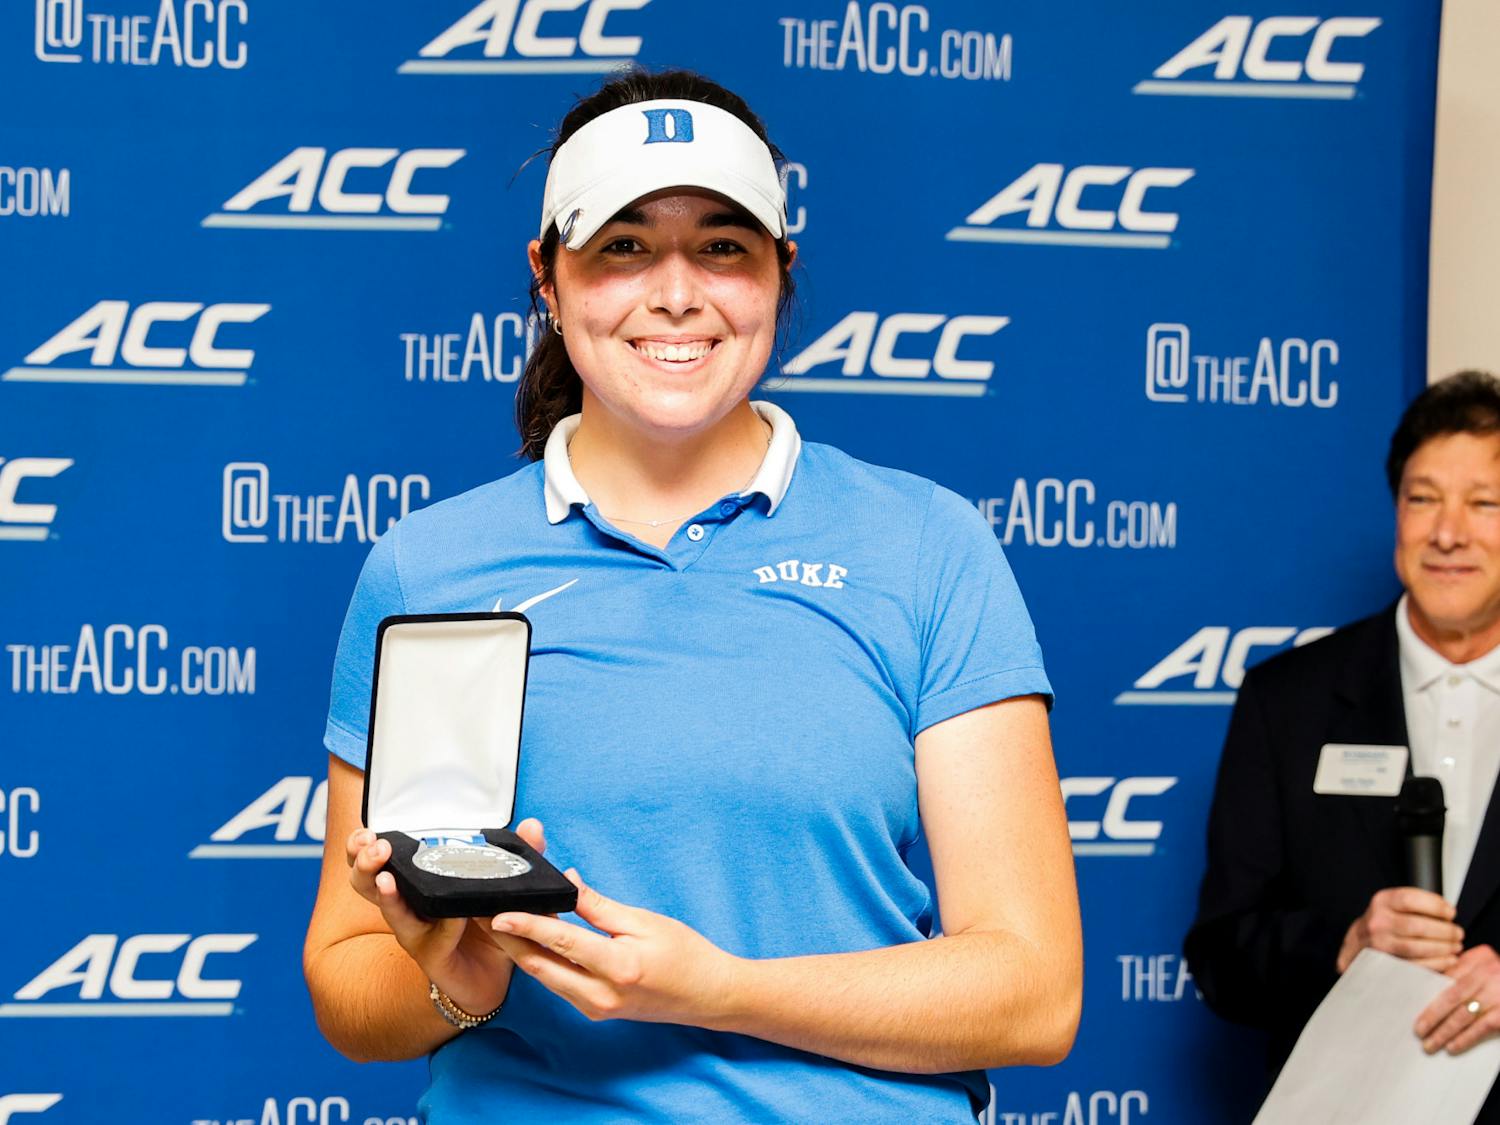 Phoebe Brinker placed second individually at the ACC Championship, one year after winning the individual title.